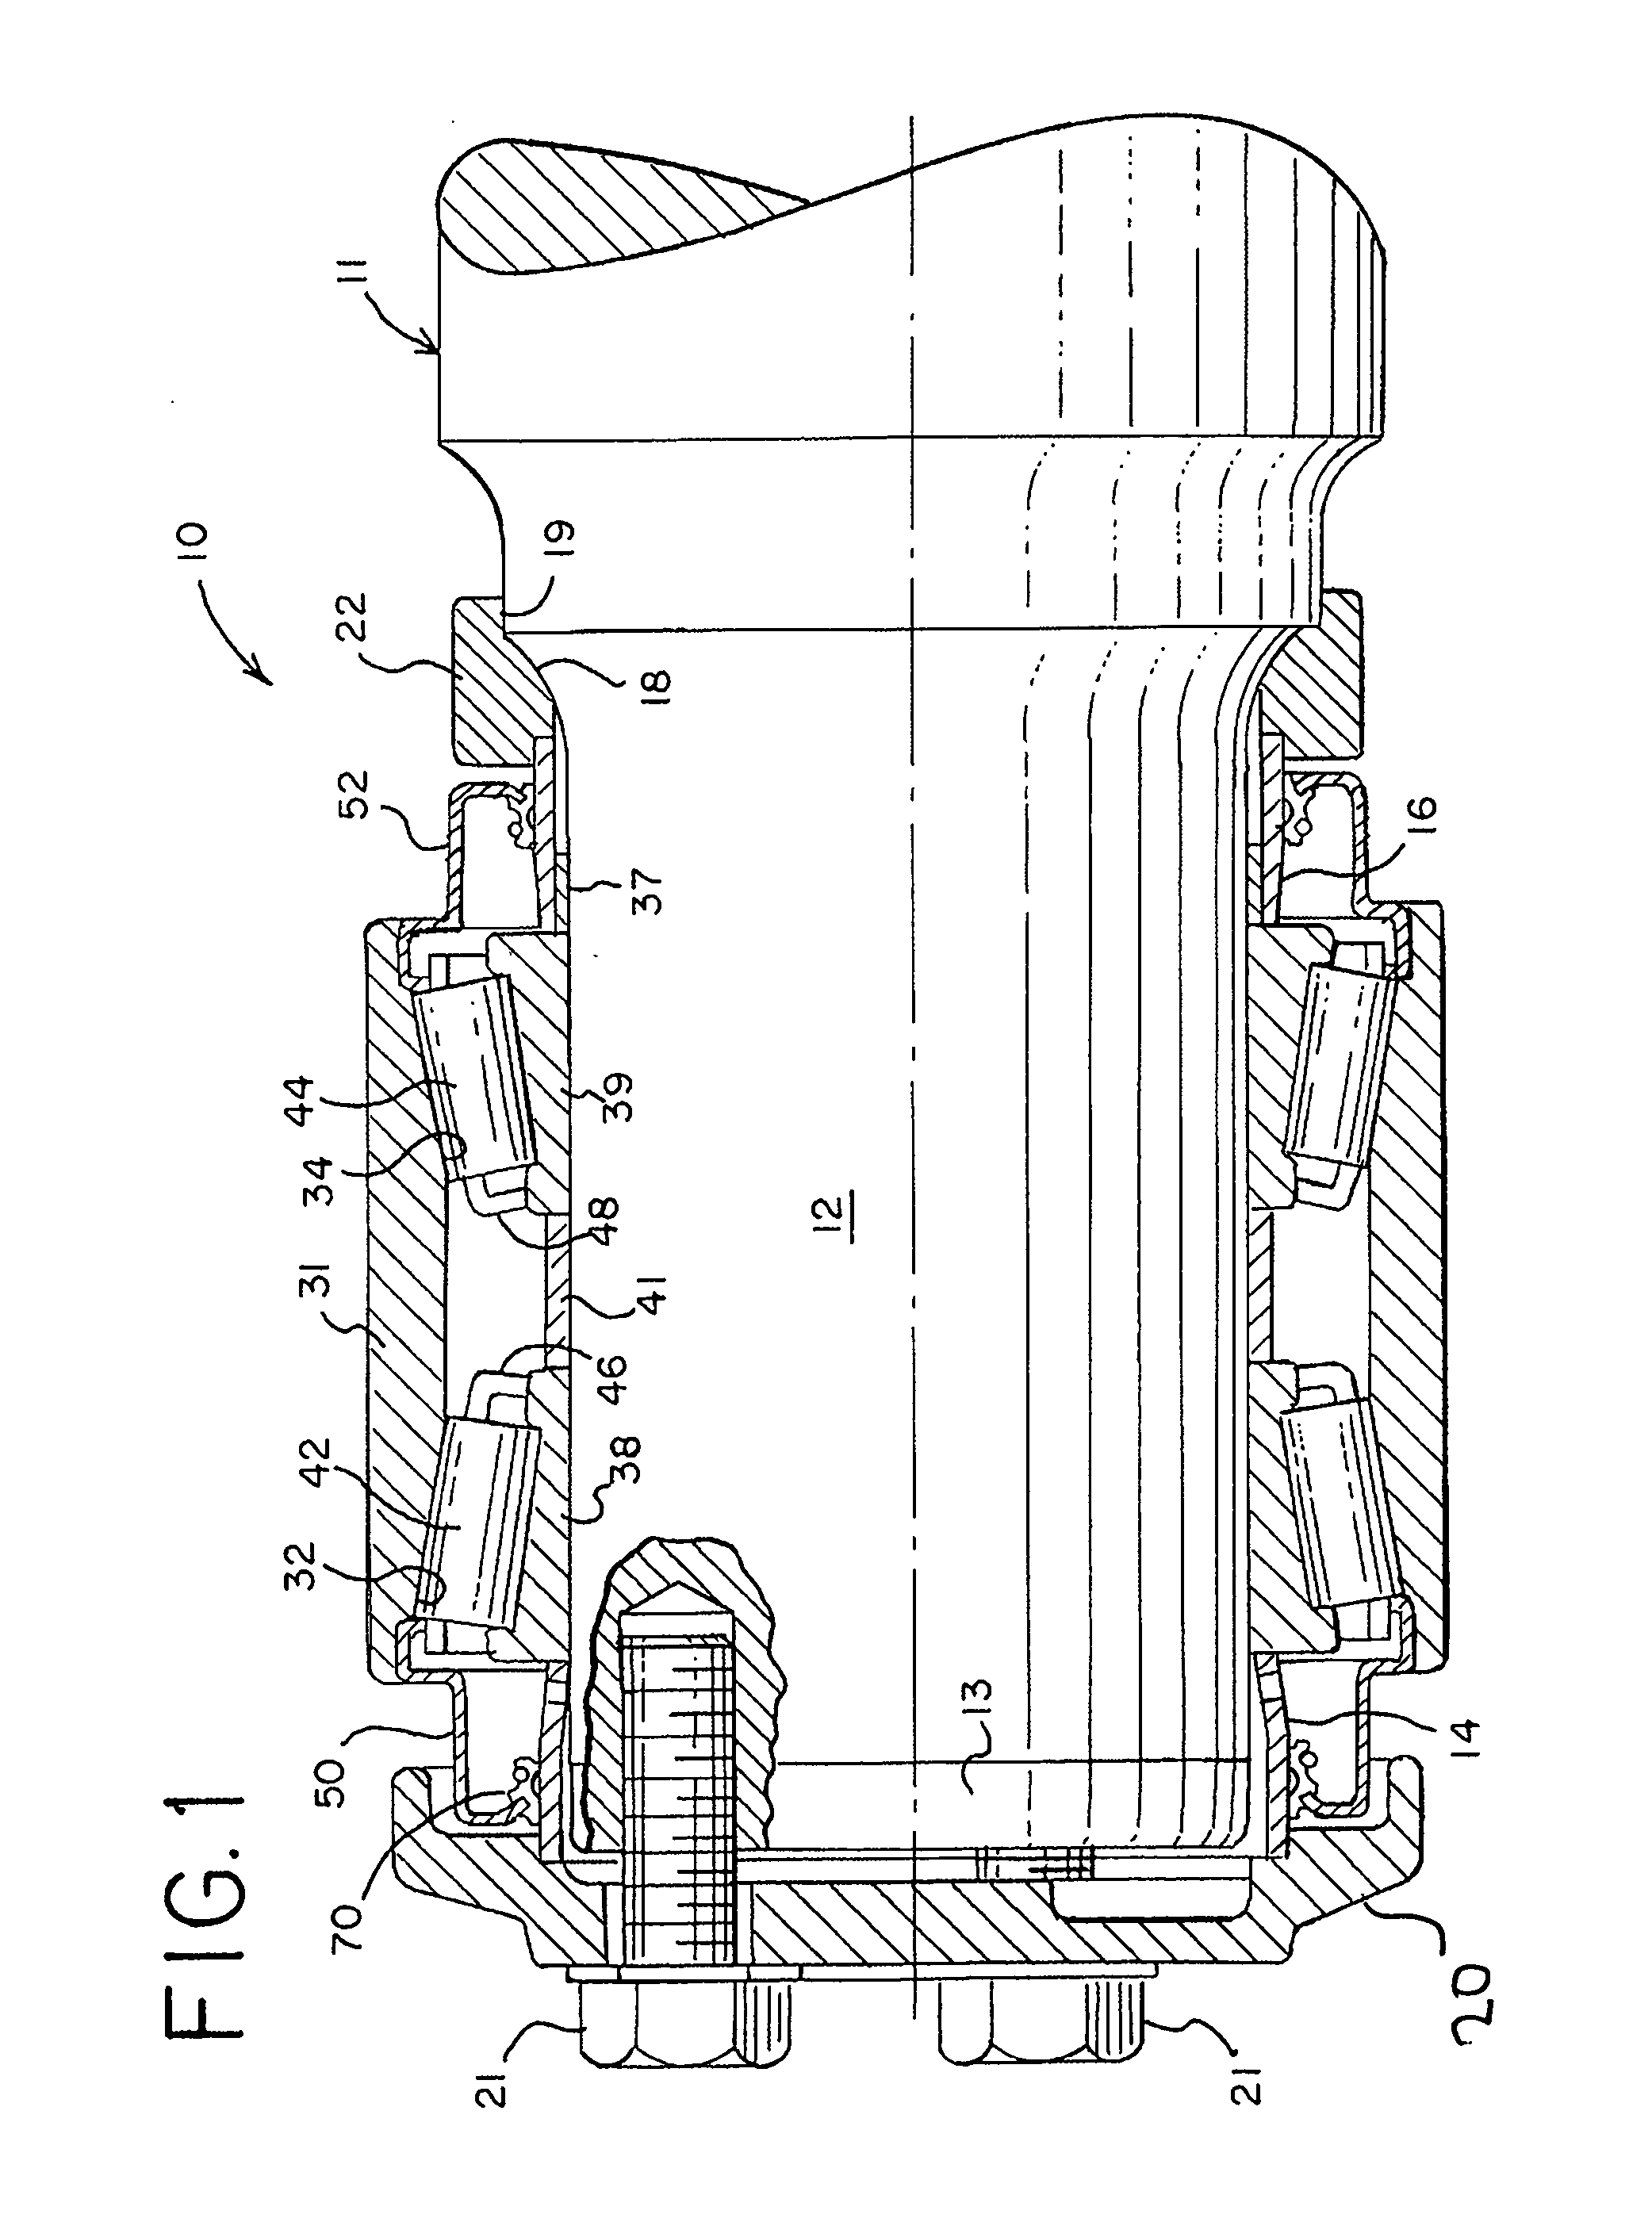 Bearing assembly having a dust seal arrangement with contacting and non-contacting dust seals